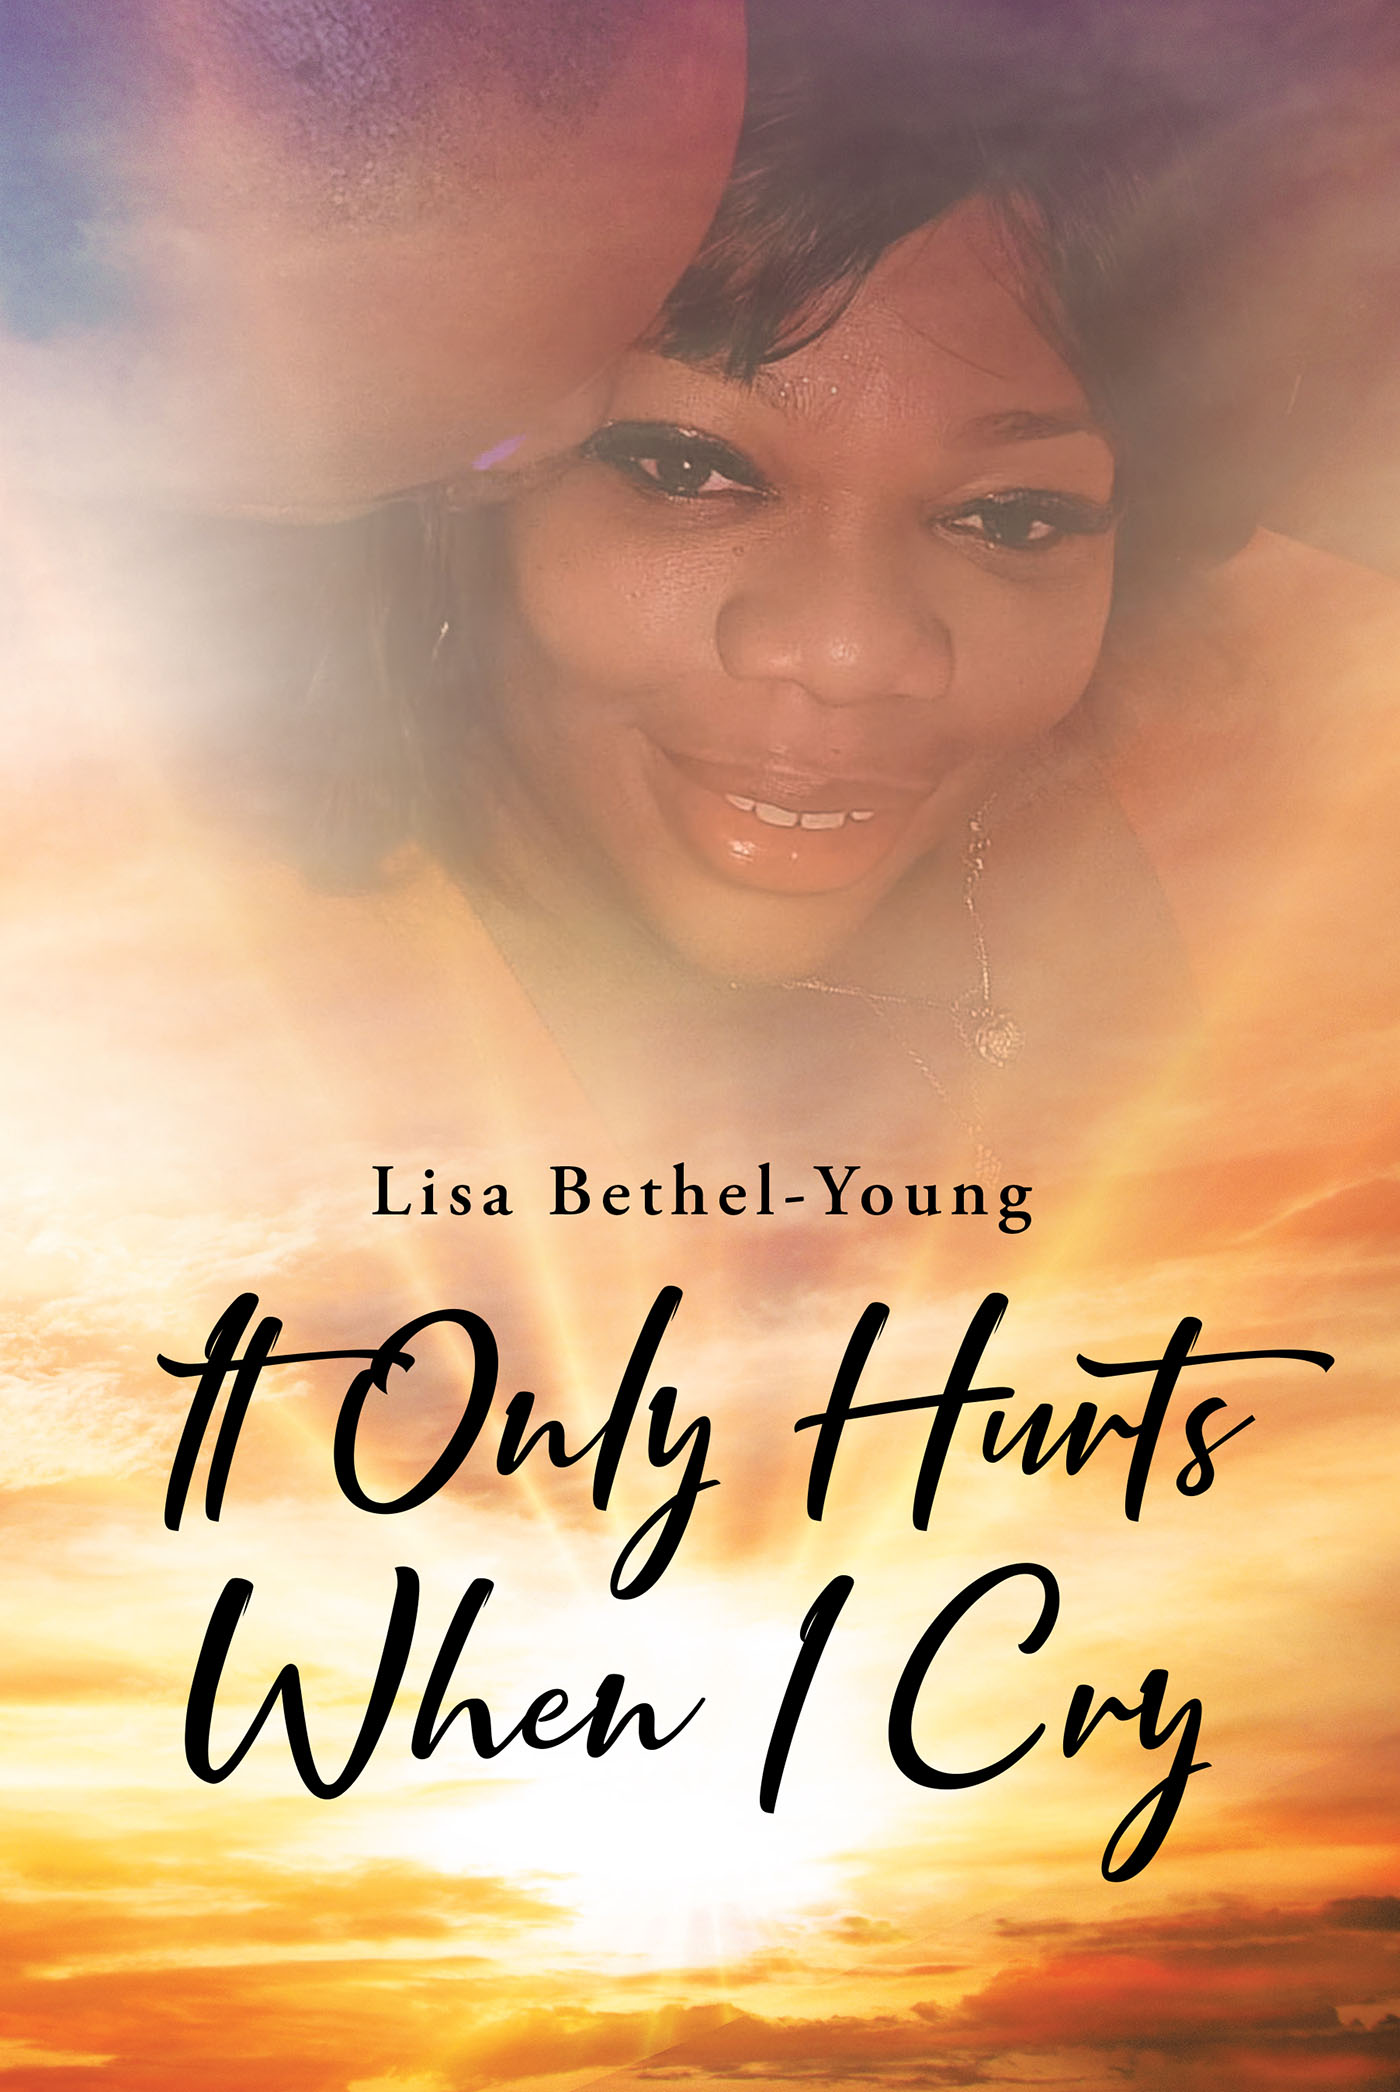 Author Lisa Bethel-Young’s New Book, “It Only Hurts When I Cry,” is a Potent Memoir That Looks Back on the Author’s Tumultuous Upbringing and Offers Inspiration